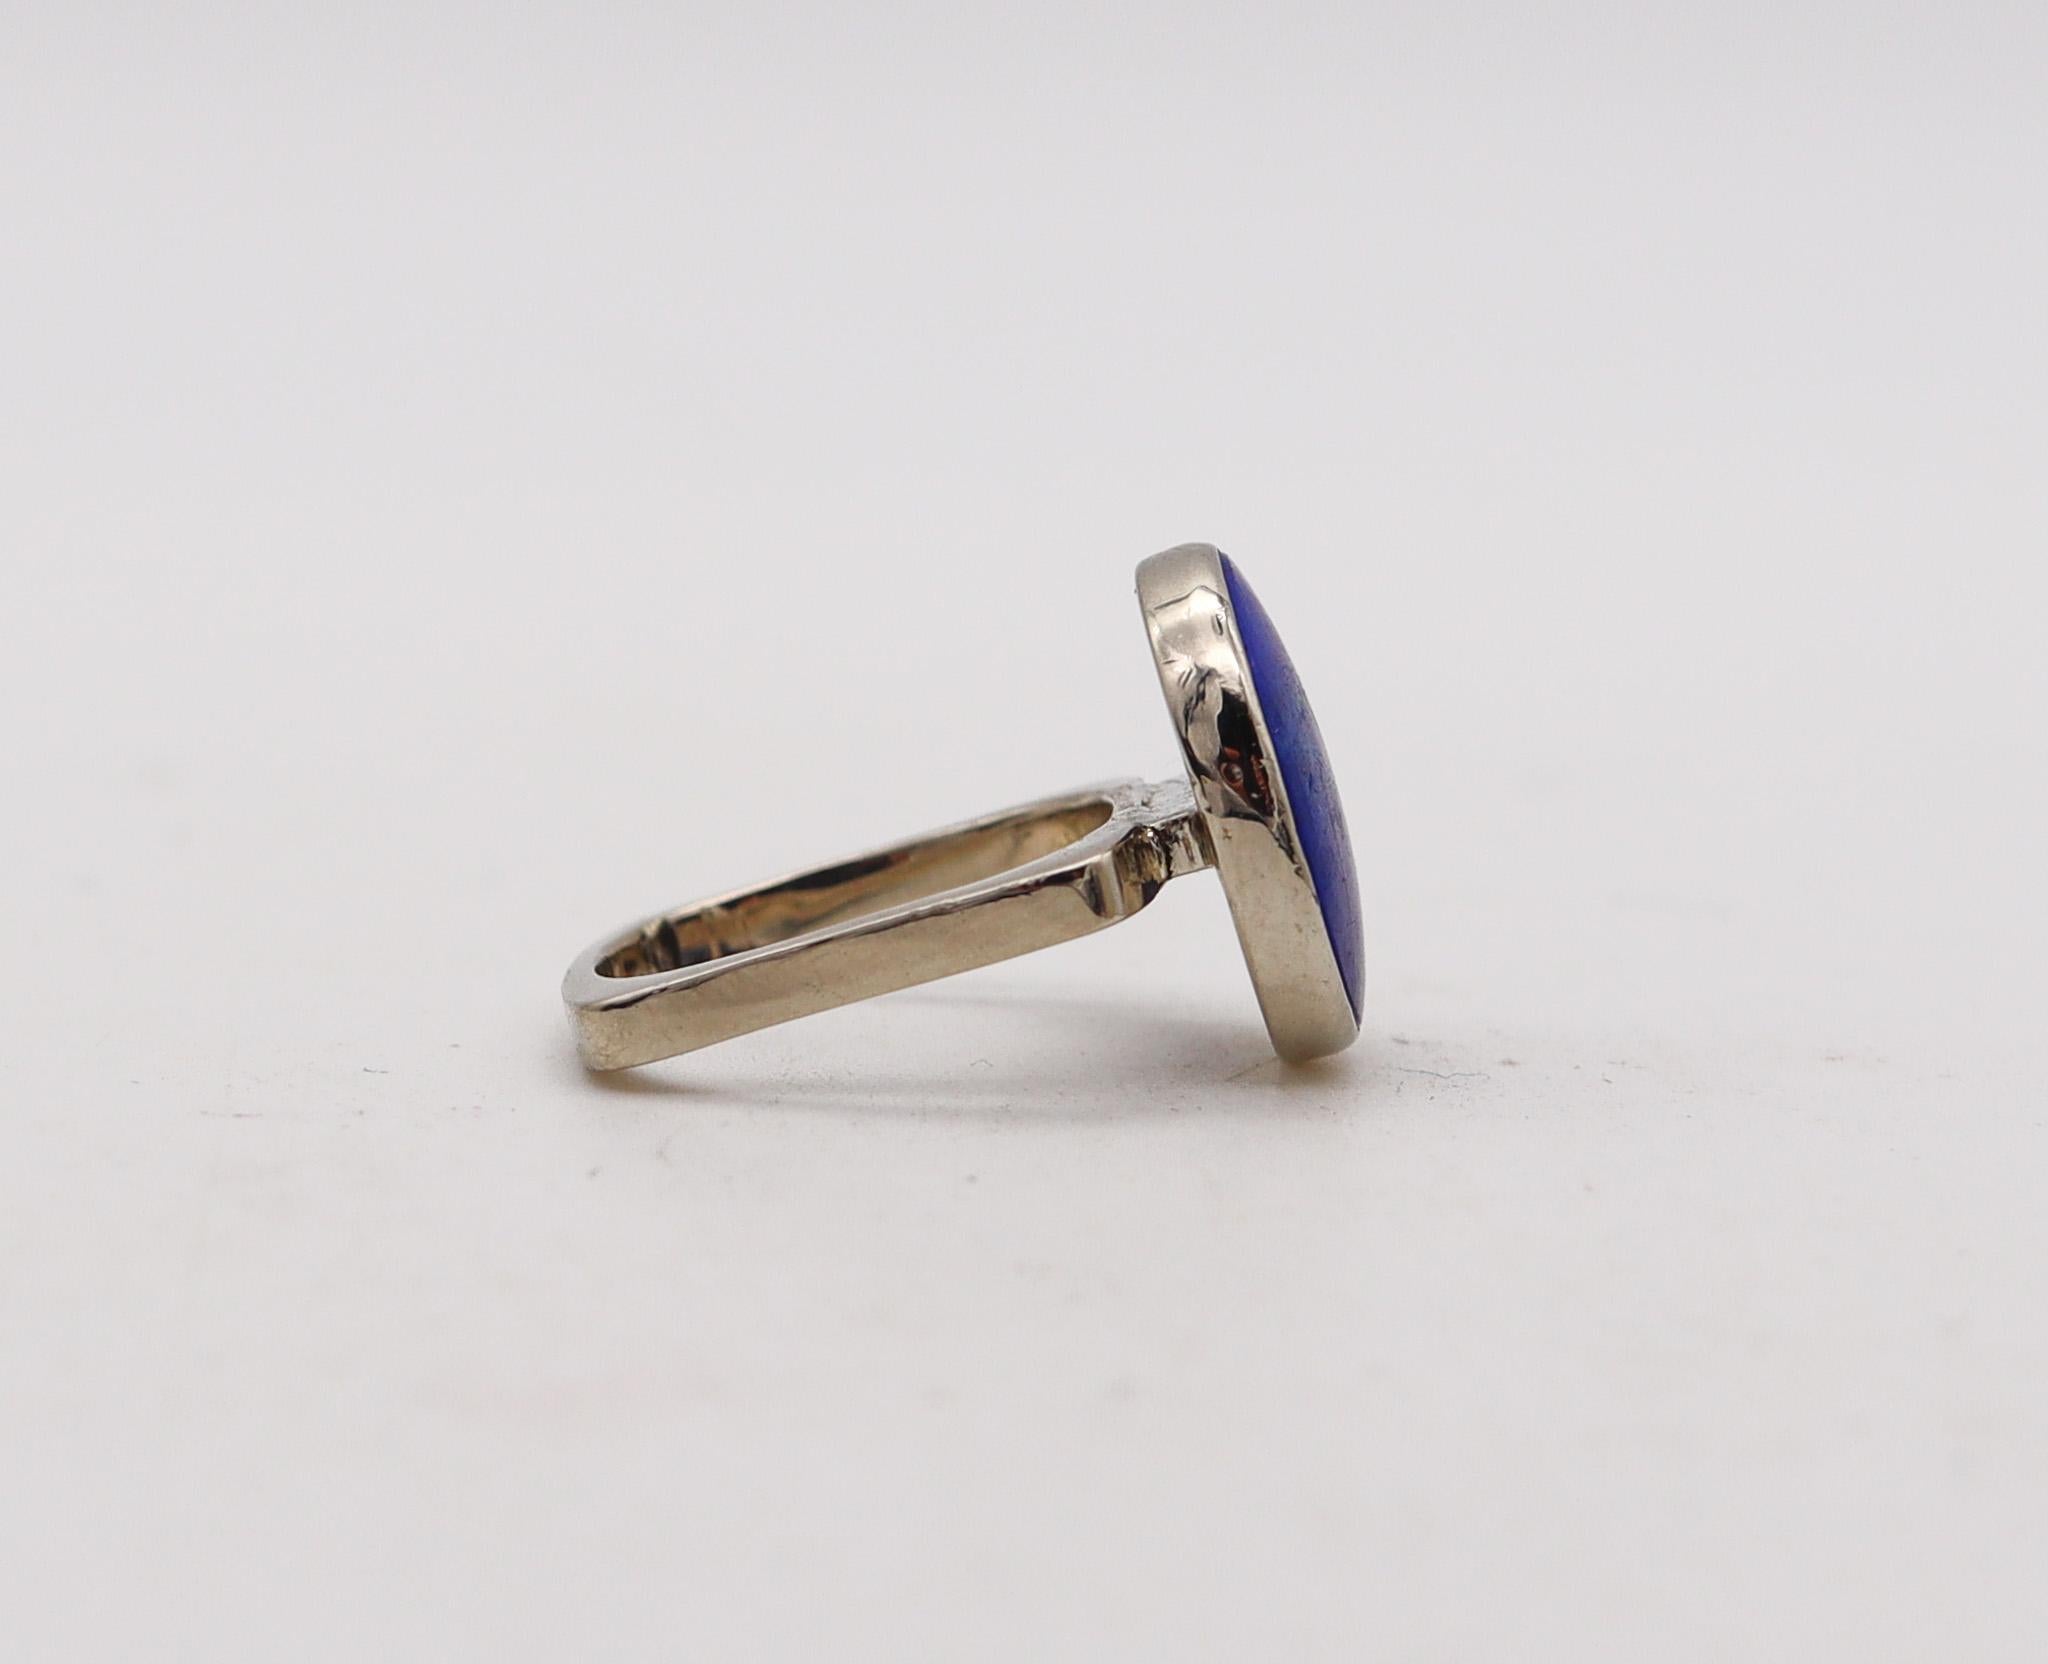 Modernist Dinh Van 1970 Paris Geometric Sculptural Ring In 18Kt White Gold With Lapis For Sale